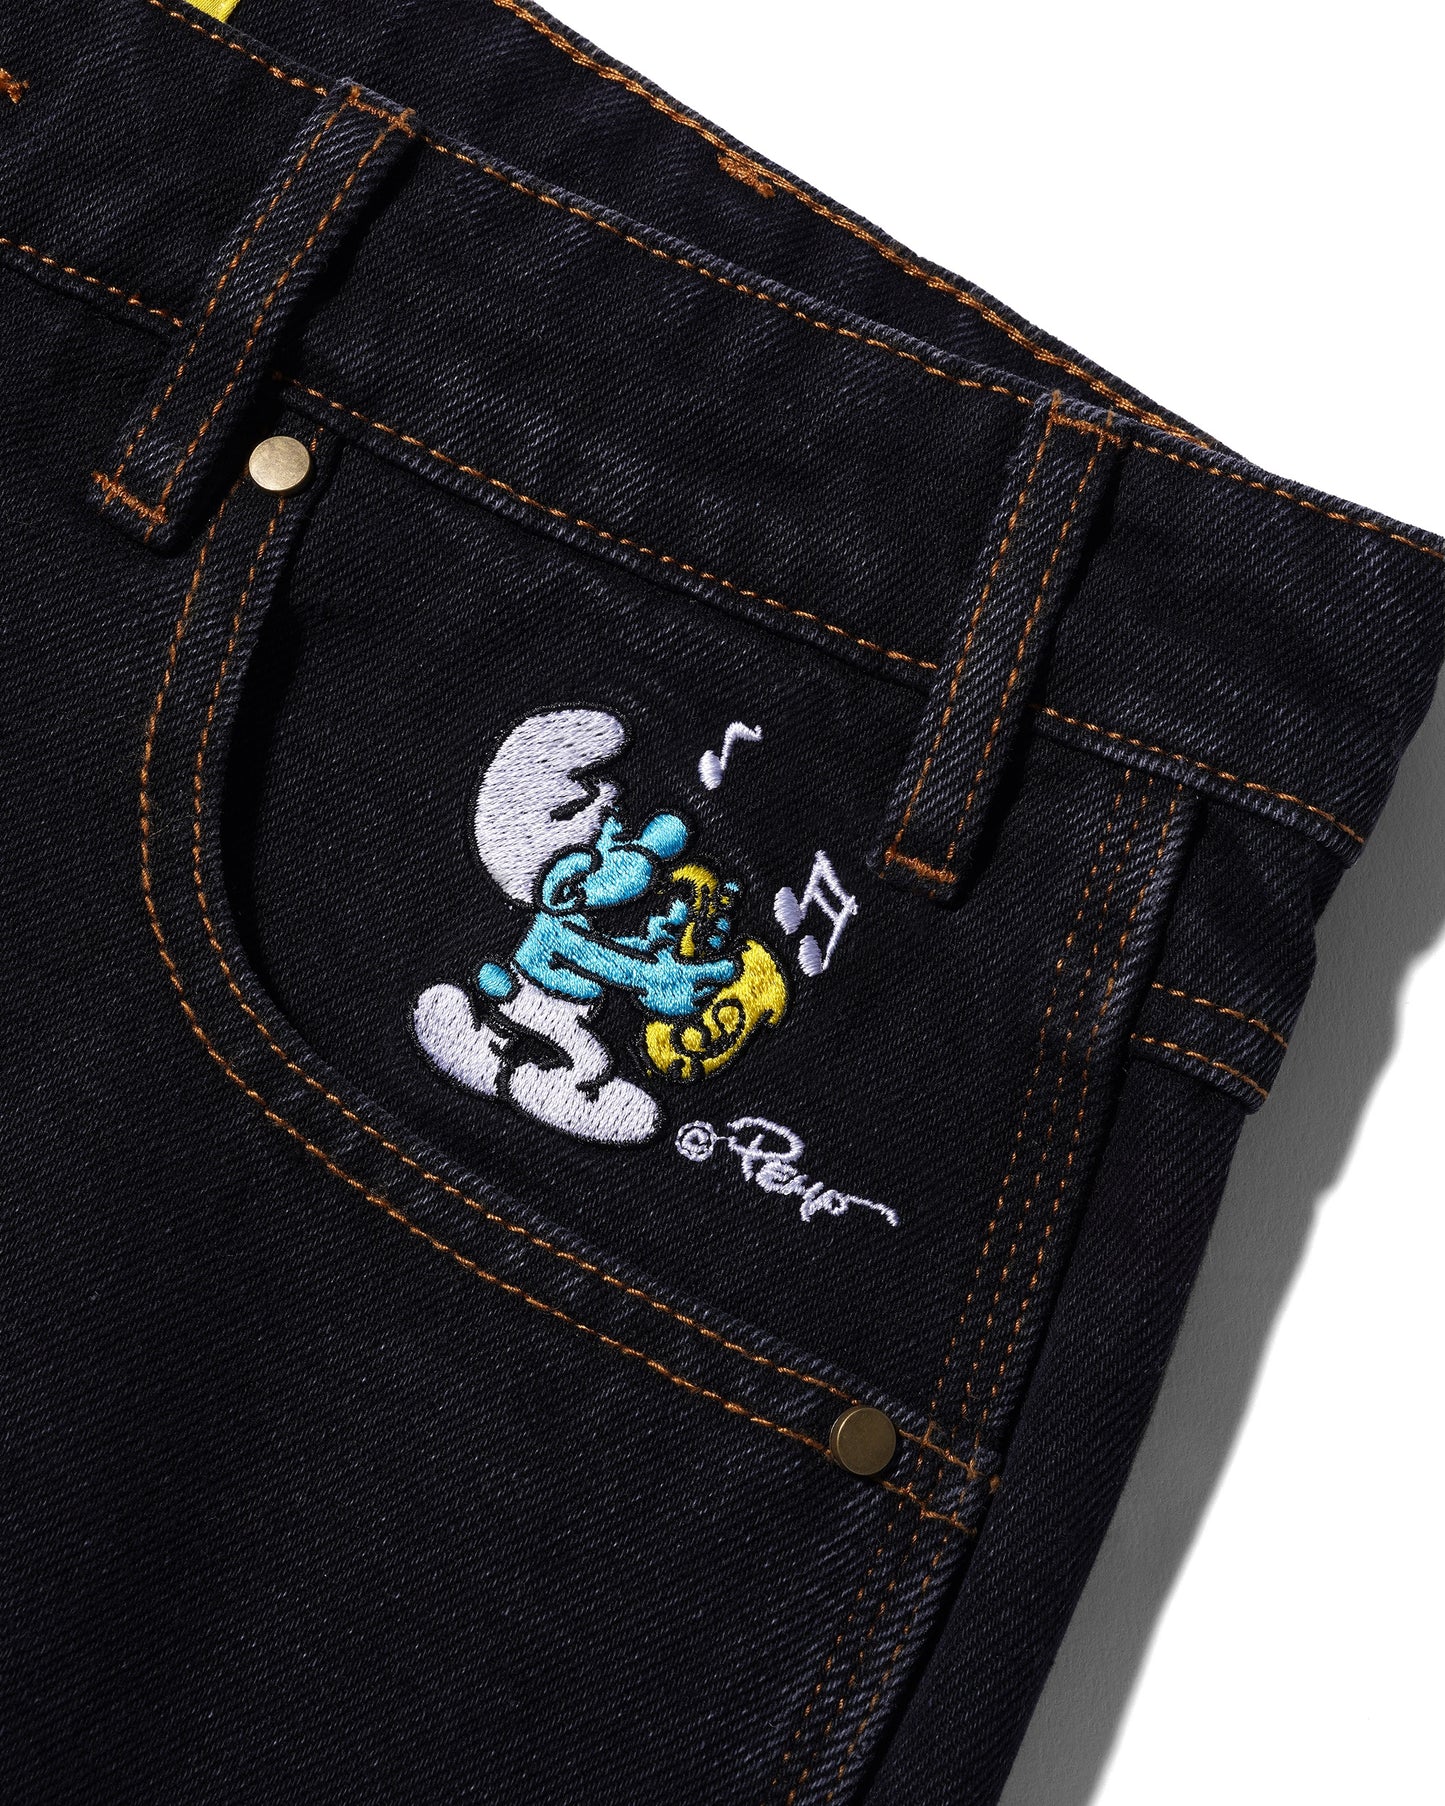 Butter Goods x The Smurfs™ Harmony Denim Pants Washed Black